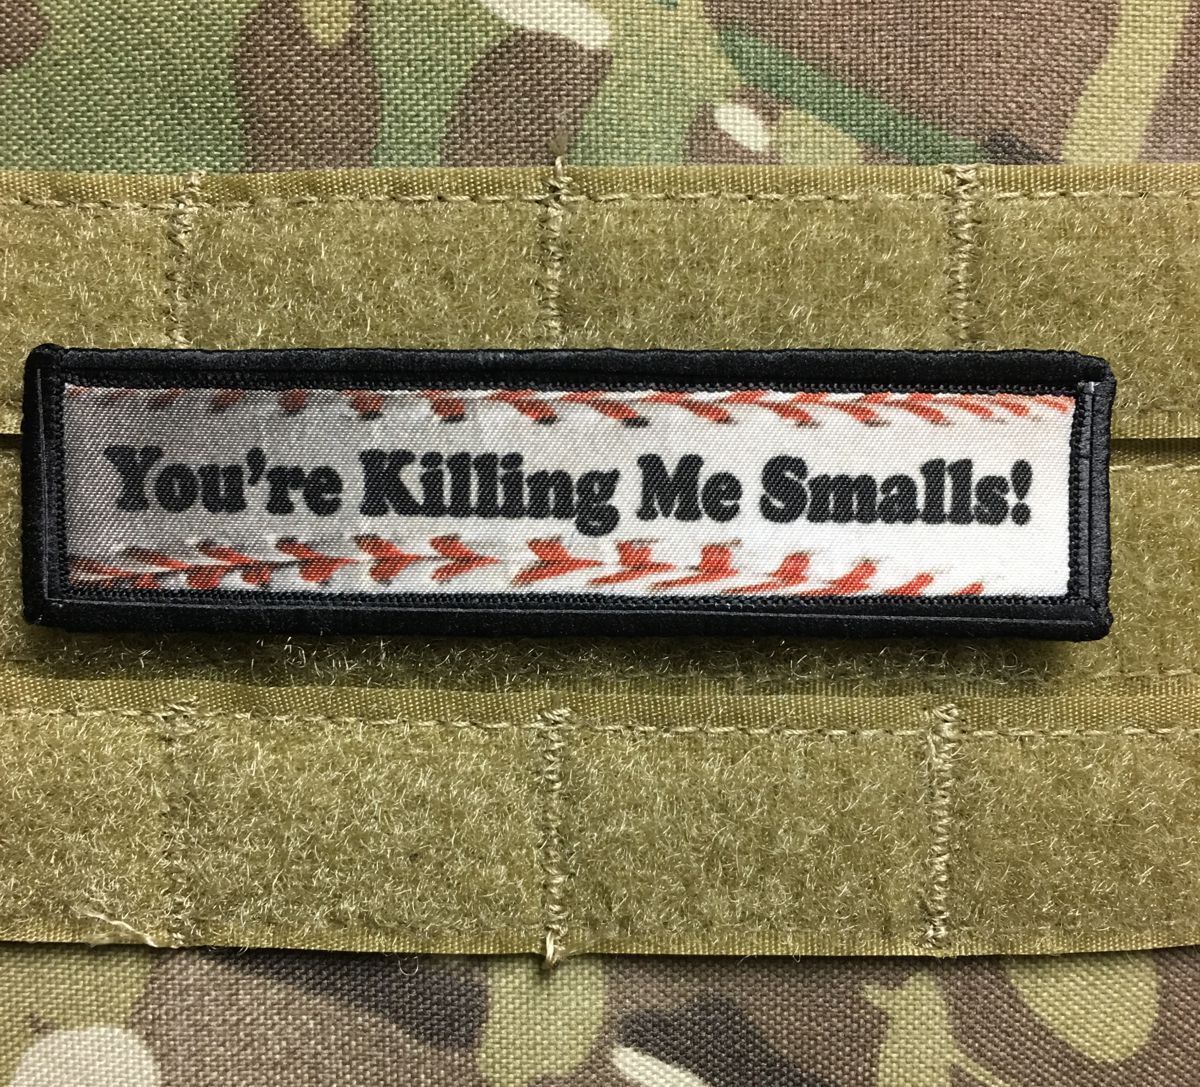 1x4 You're Killing Me Smalls Morale Patch Tactical Military Army Baseball Funny